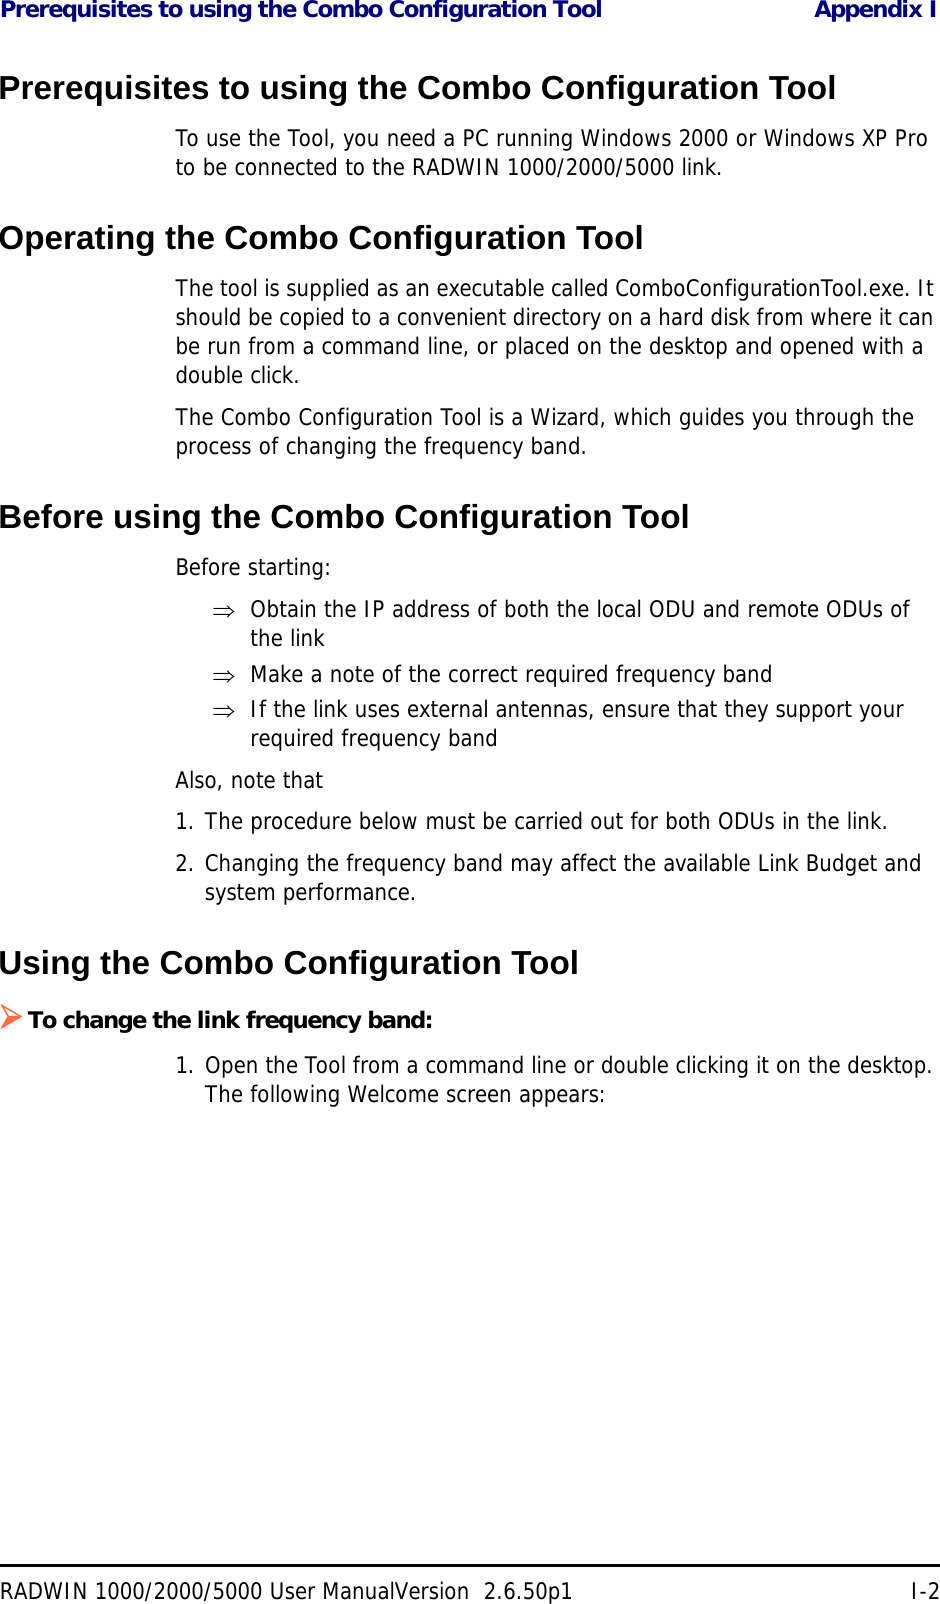 Prerequisites to using the Combo Configuration Tool Appendix IRADWIN 1000/2000/5000 User ManualVersion  2.6.50p1 I-2Prerequisites to using the Combo Configuration ToolTo use the Tool, you need a PC running Windows 2000 or Windows XP Pro to be connected to the RADWIN 1000/2000/5000 link.Operating the Combo Configuration ToolThe tool is supplied as an executable called ComboConfigurationTool.exe. It should be copied to a convenient directory on a hard disk from where it can be run from a command line, or placed on the desktop and opened with a double click.The Combo Configuration Tool is a Wizard, which guides you through the process of changing the frequency band. Before using the Combo Configuration ToolBefore starting:Obtain the IP address of both the local ODU and remote ODUs of the linkMake a note of the correct required frequency bandIf the link uses external antennas, ensure that they support your required frequency bandAlso, note that1. The procedure below must be carried out for both ODUs in the link.2. Changing the frequency band may affect the available Link Budget and system performance.Using the Combo Configuration ToolTo change the link frequency band:1. Open the Tool from a command line or double clicking it on the desktop. The following Welcome screen appears: